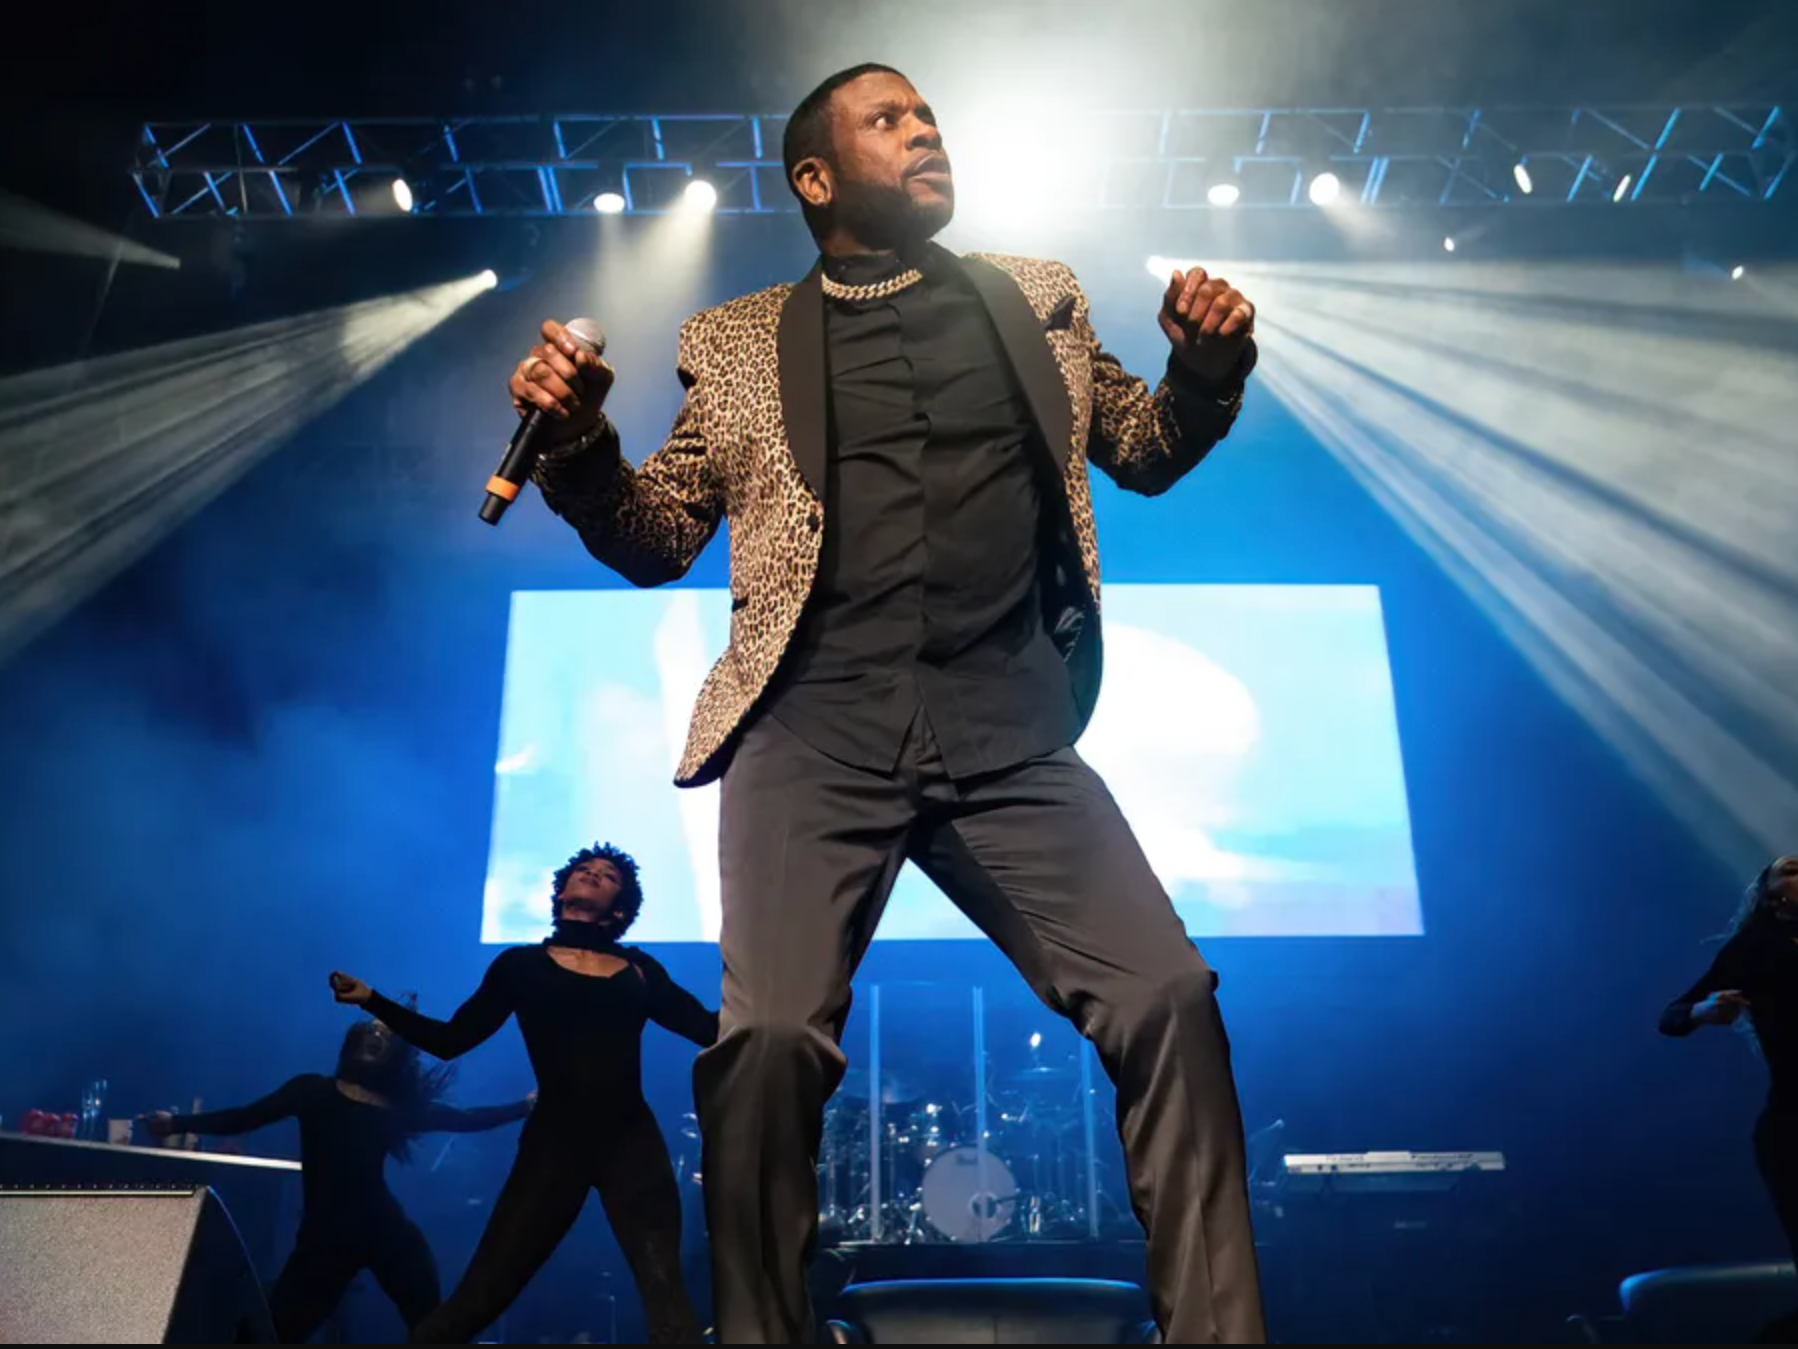 Keith Sweat at Toyota Oakdale Theatre